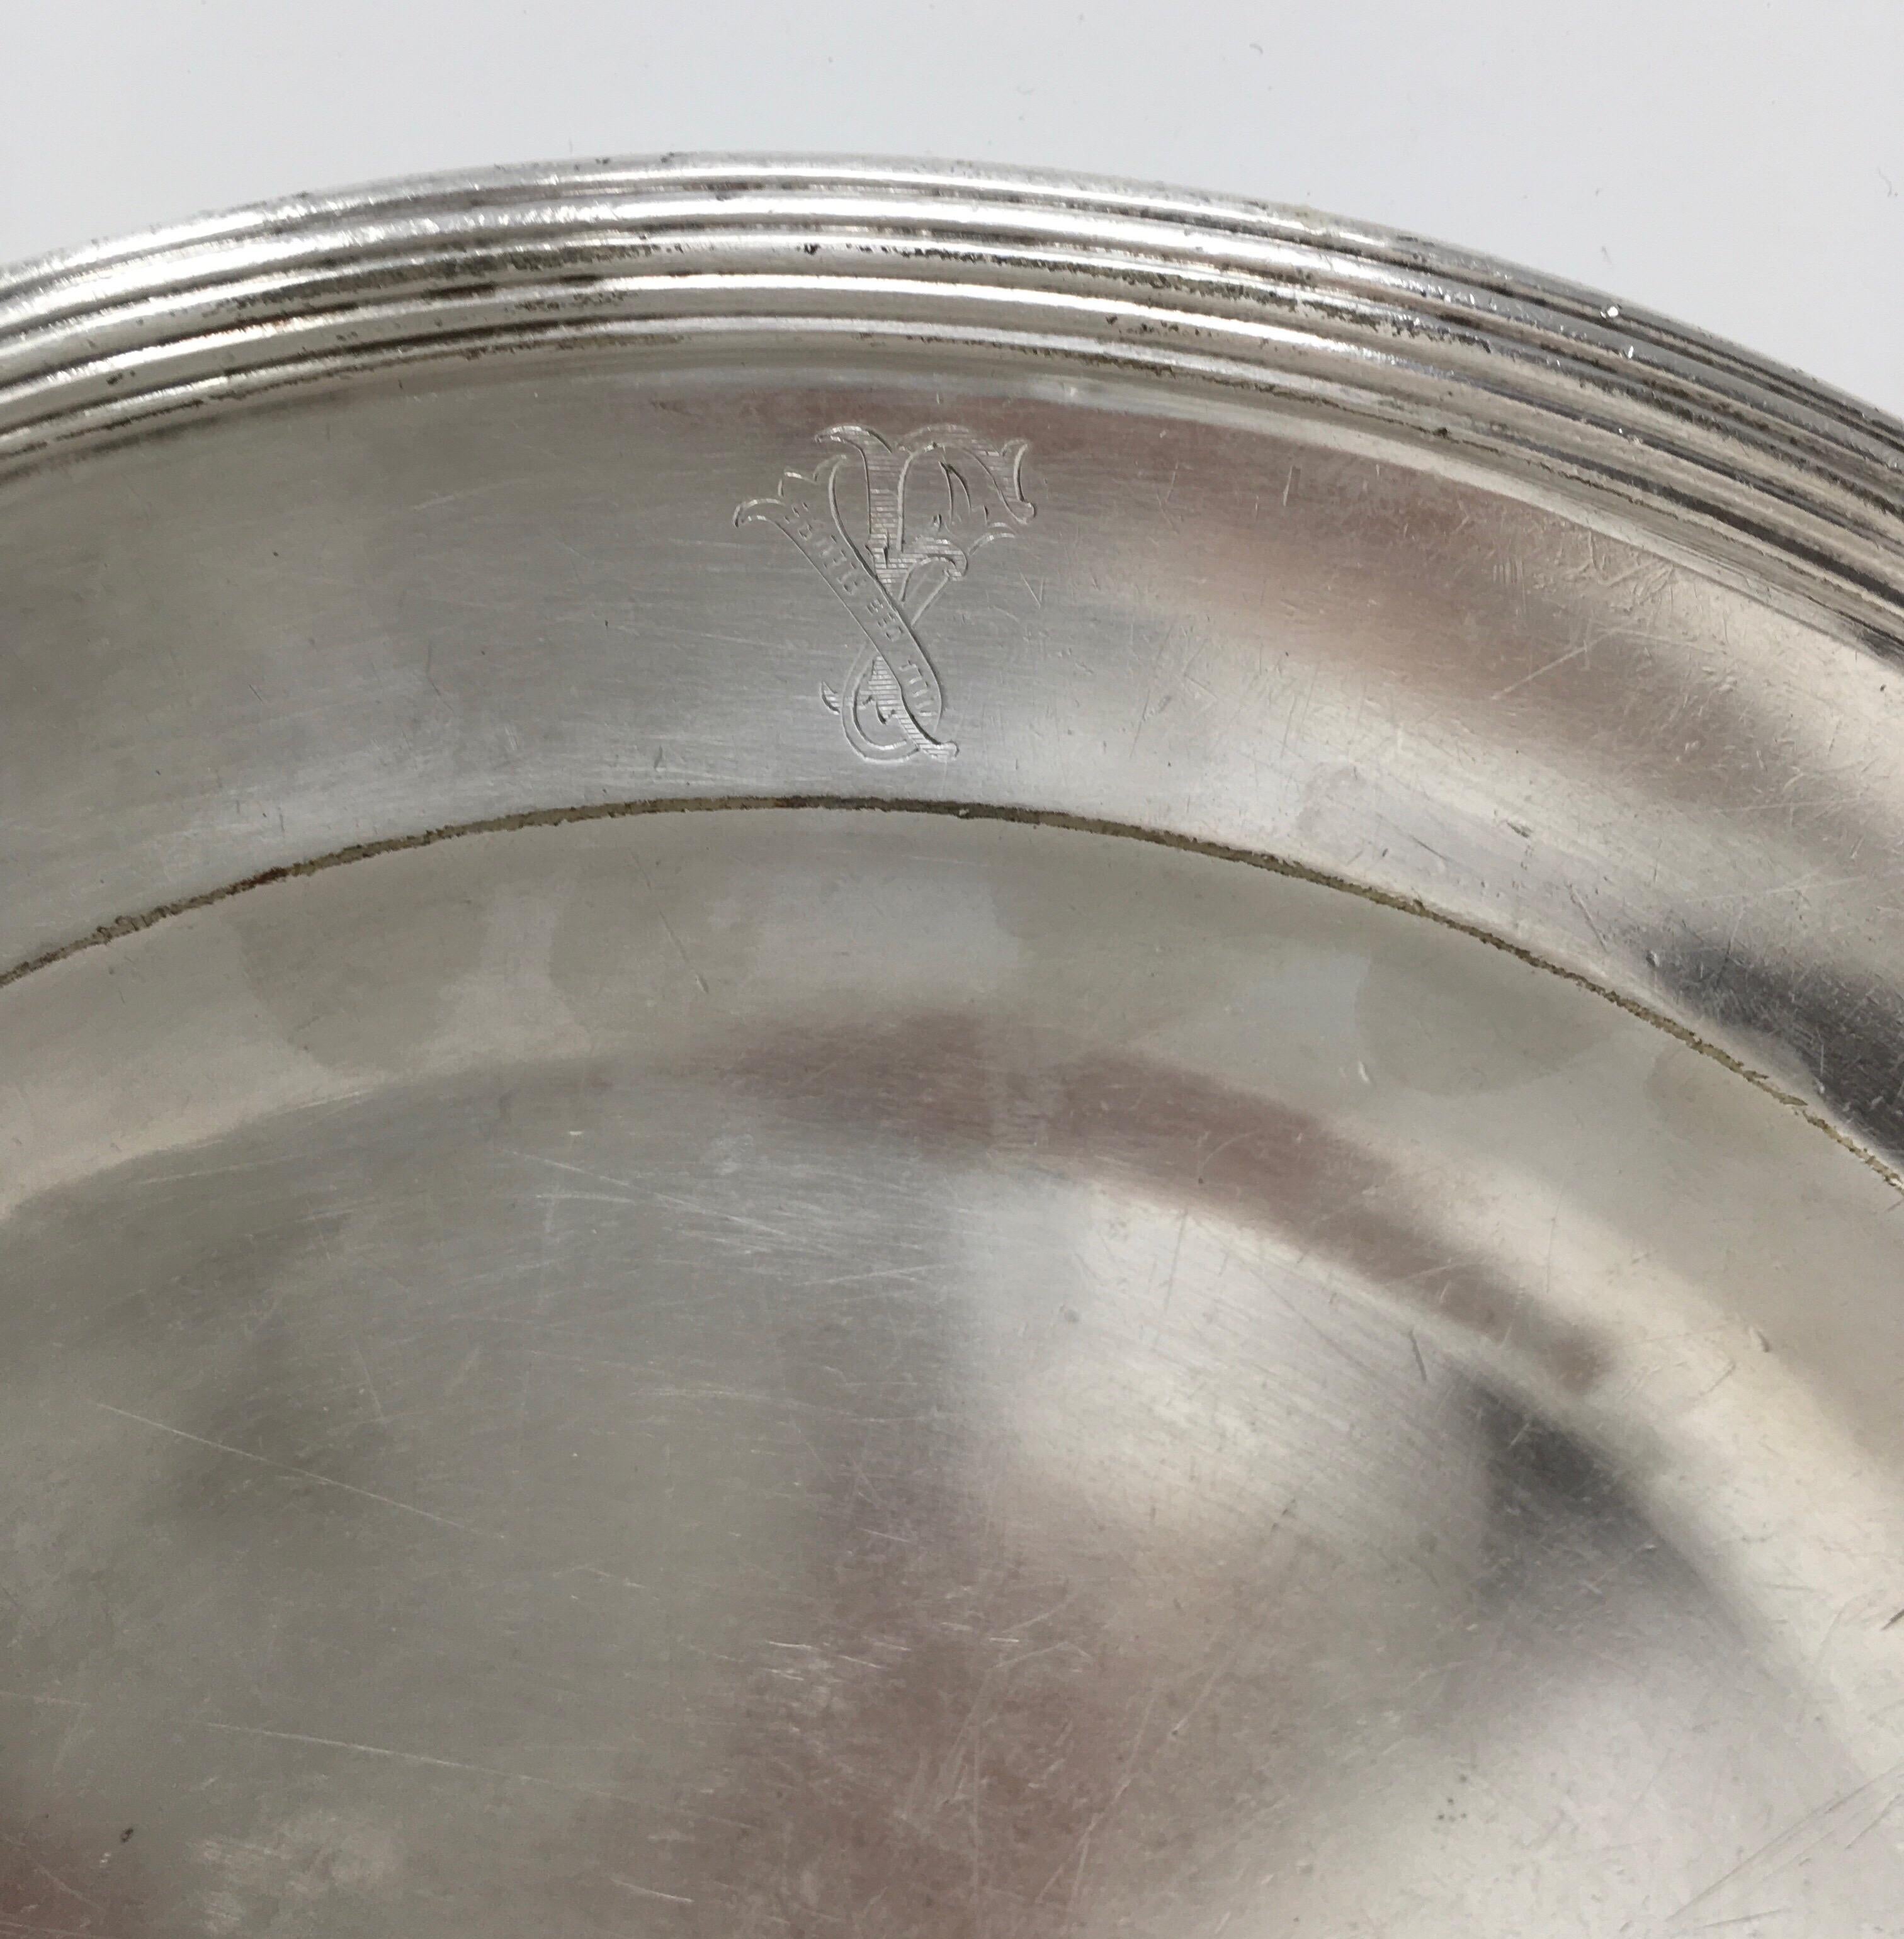 Found in France, this vintage hotel silver serving platter engraved with the Villa de Fleurs logo has a great aged patina. It would be a beautiful in a cabinet and a great addition to your table or buffet.